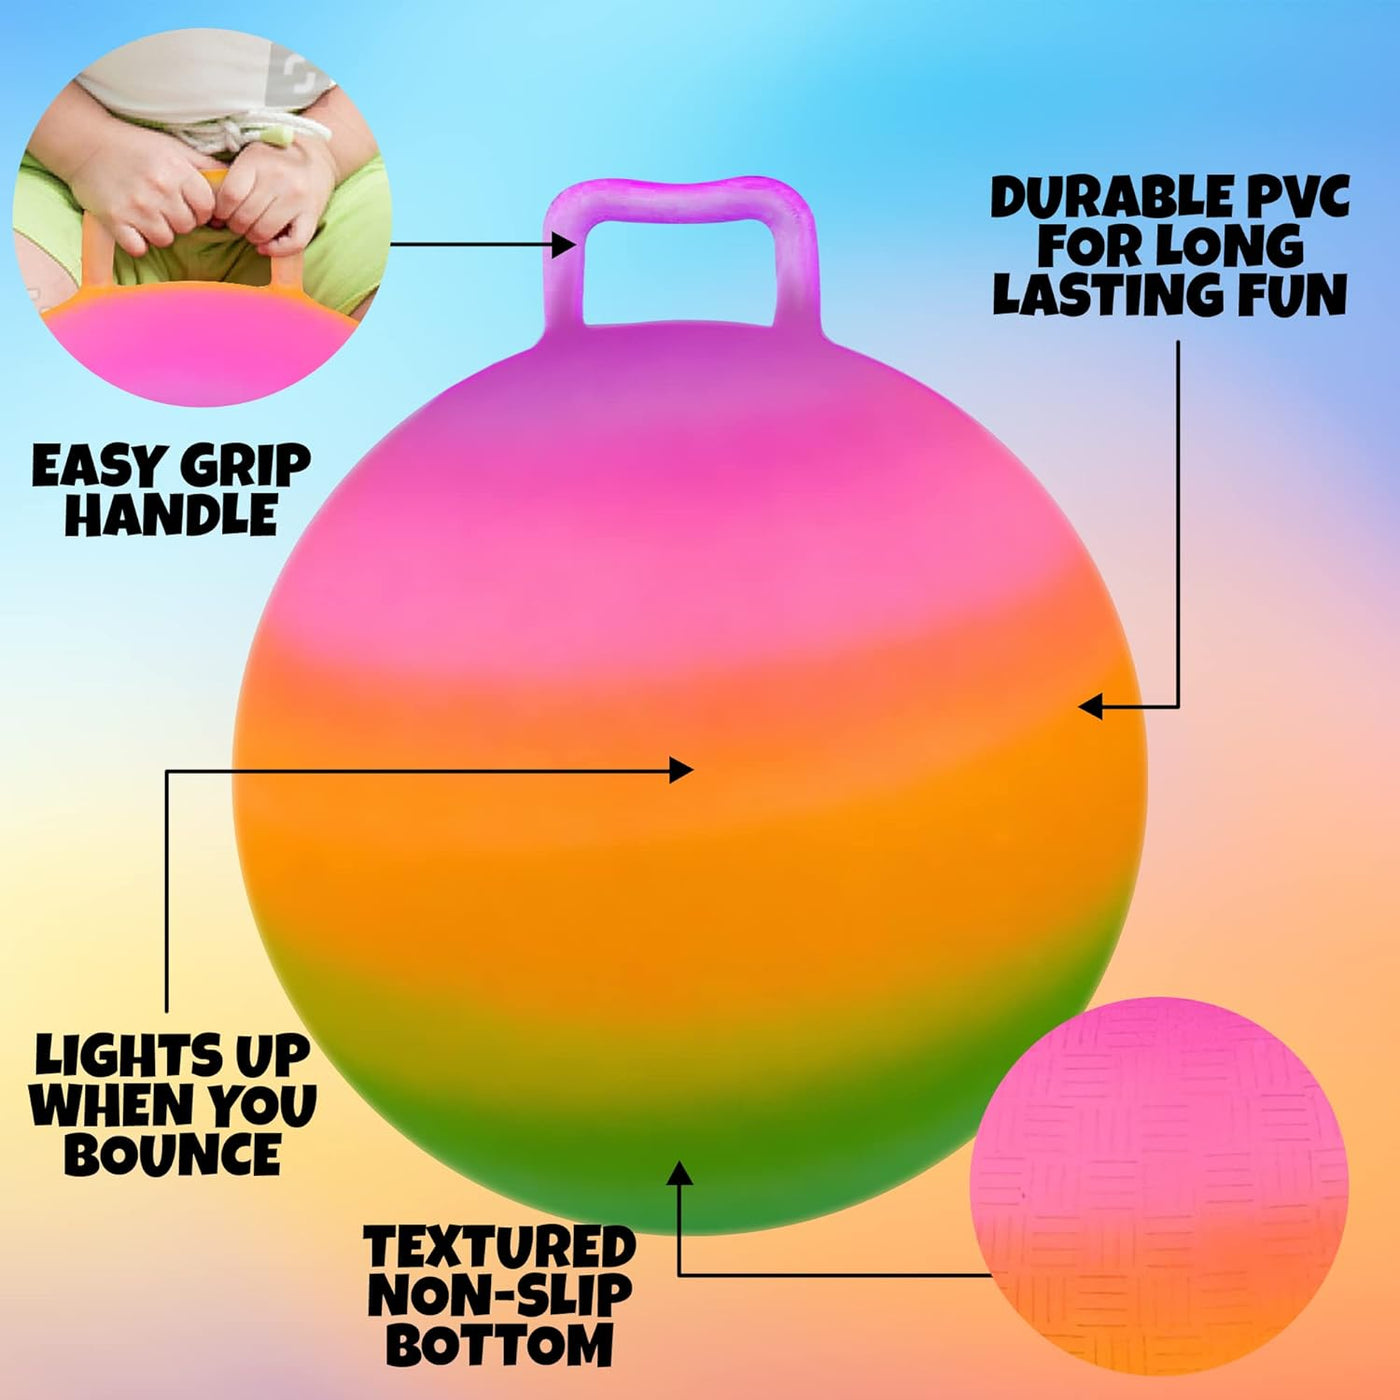 ArtCreativity Light Up Rainbow Hopper Ball with Handle, Safe and Durable 18 Inch Jumping Ball for Active Fun, LED Effect Hopper Ball with Pump for Kids, Indoor and Outdoor Toys for Boys and Girls